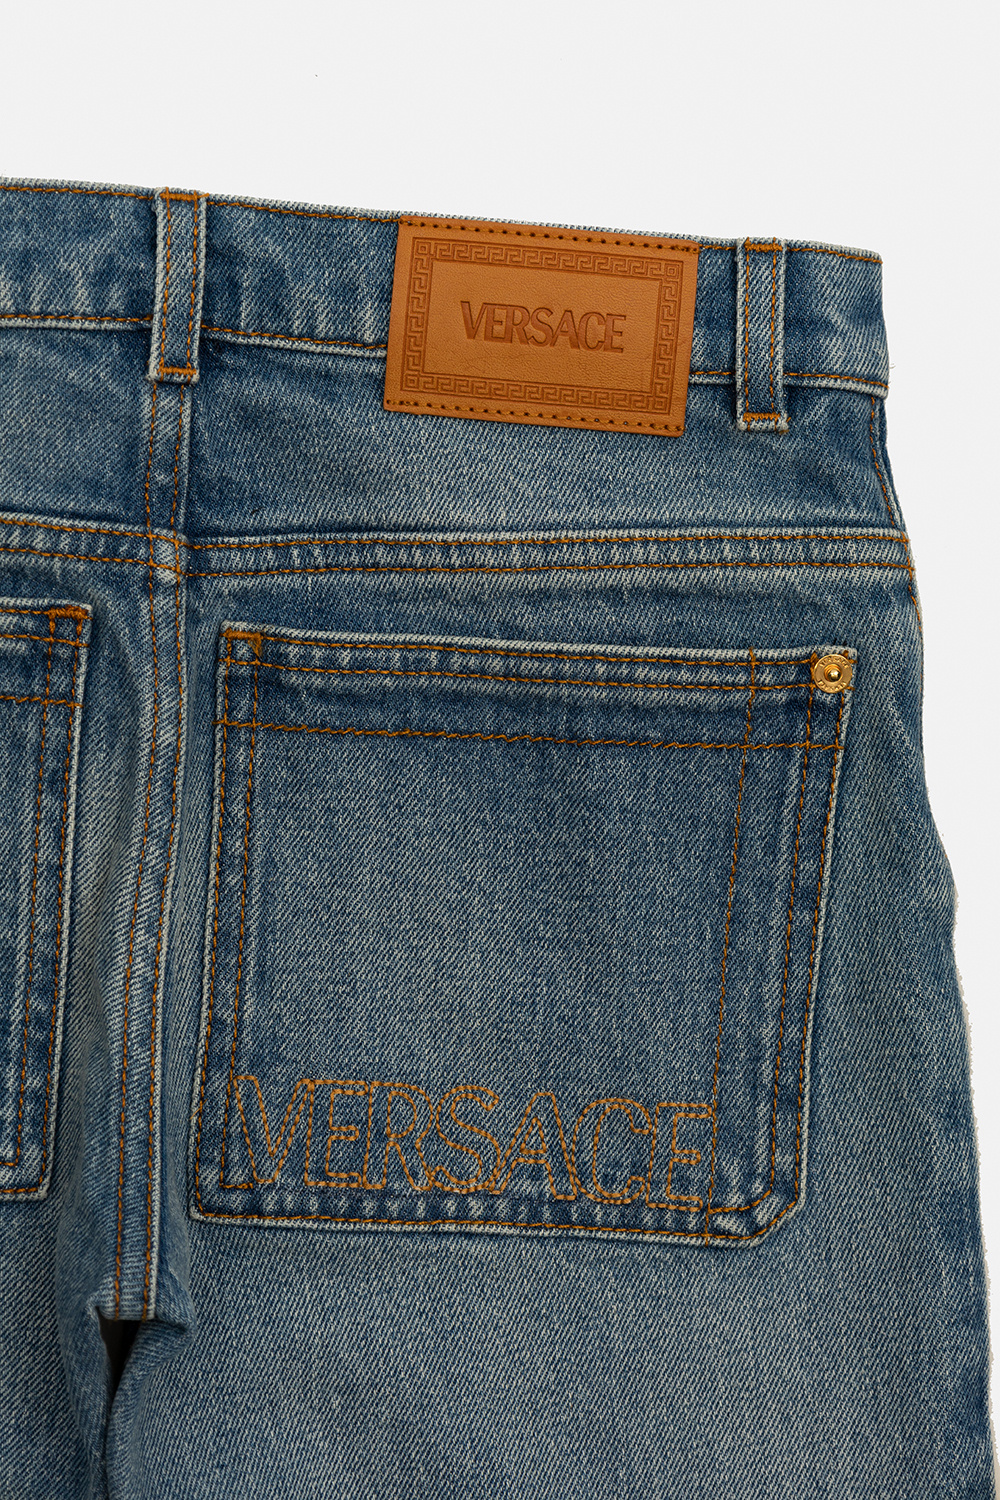 Versace Kids if you want jeans that slim your mid section and contour your curves